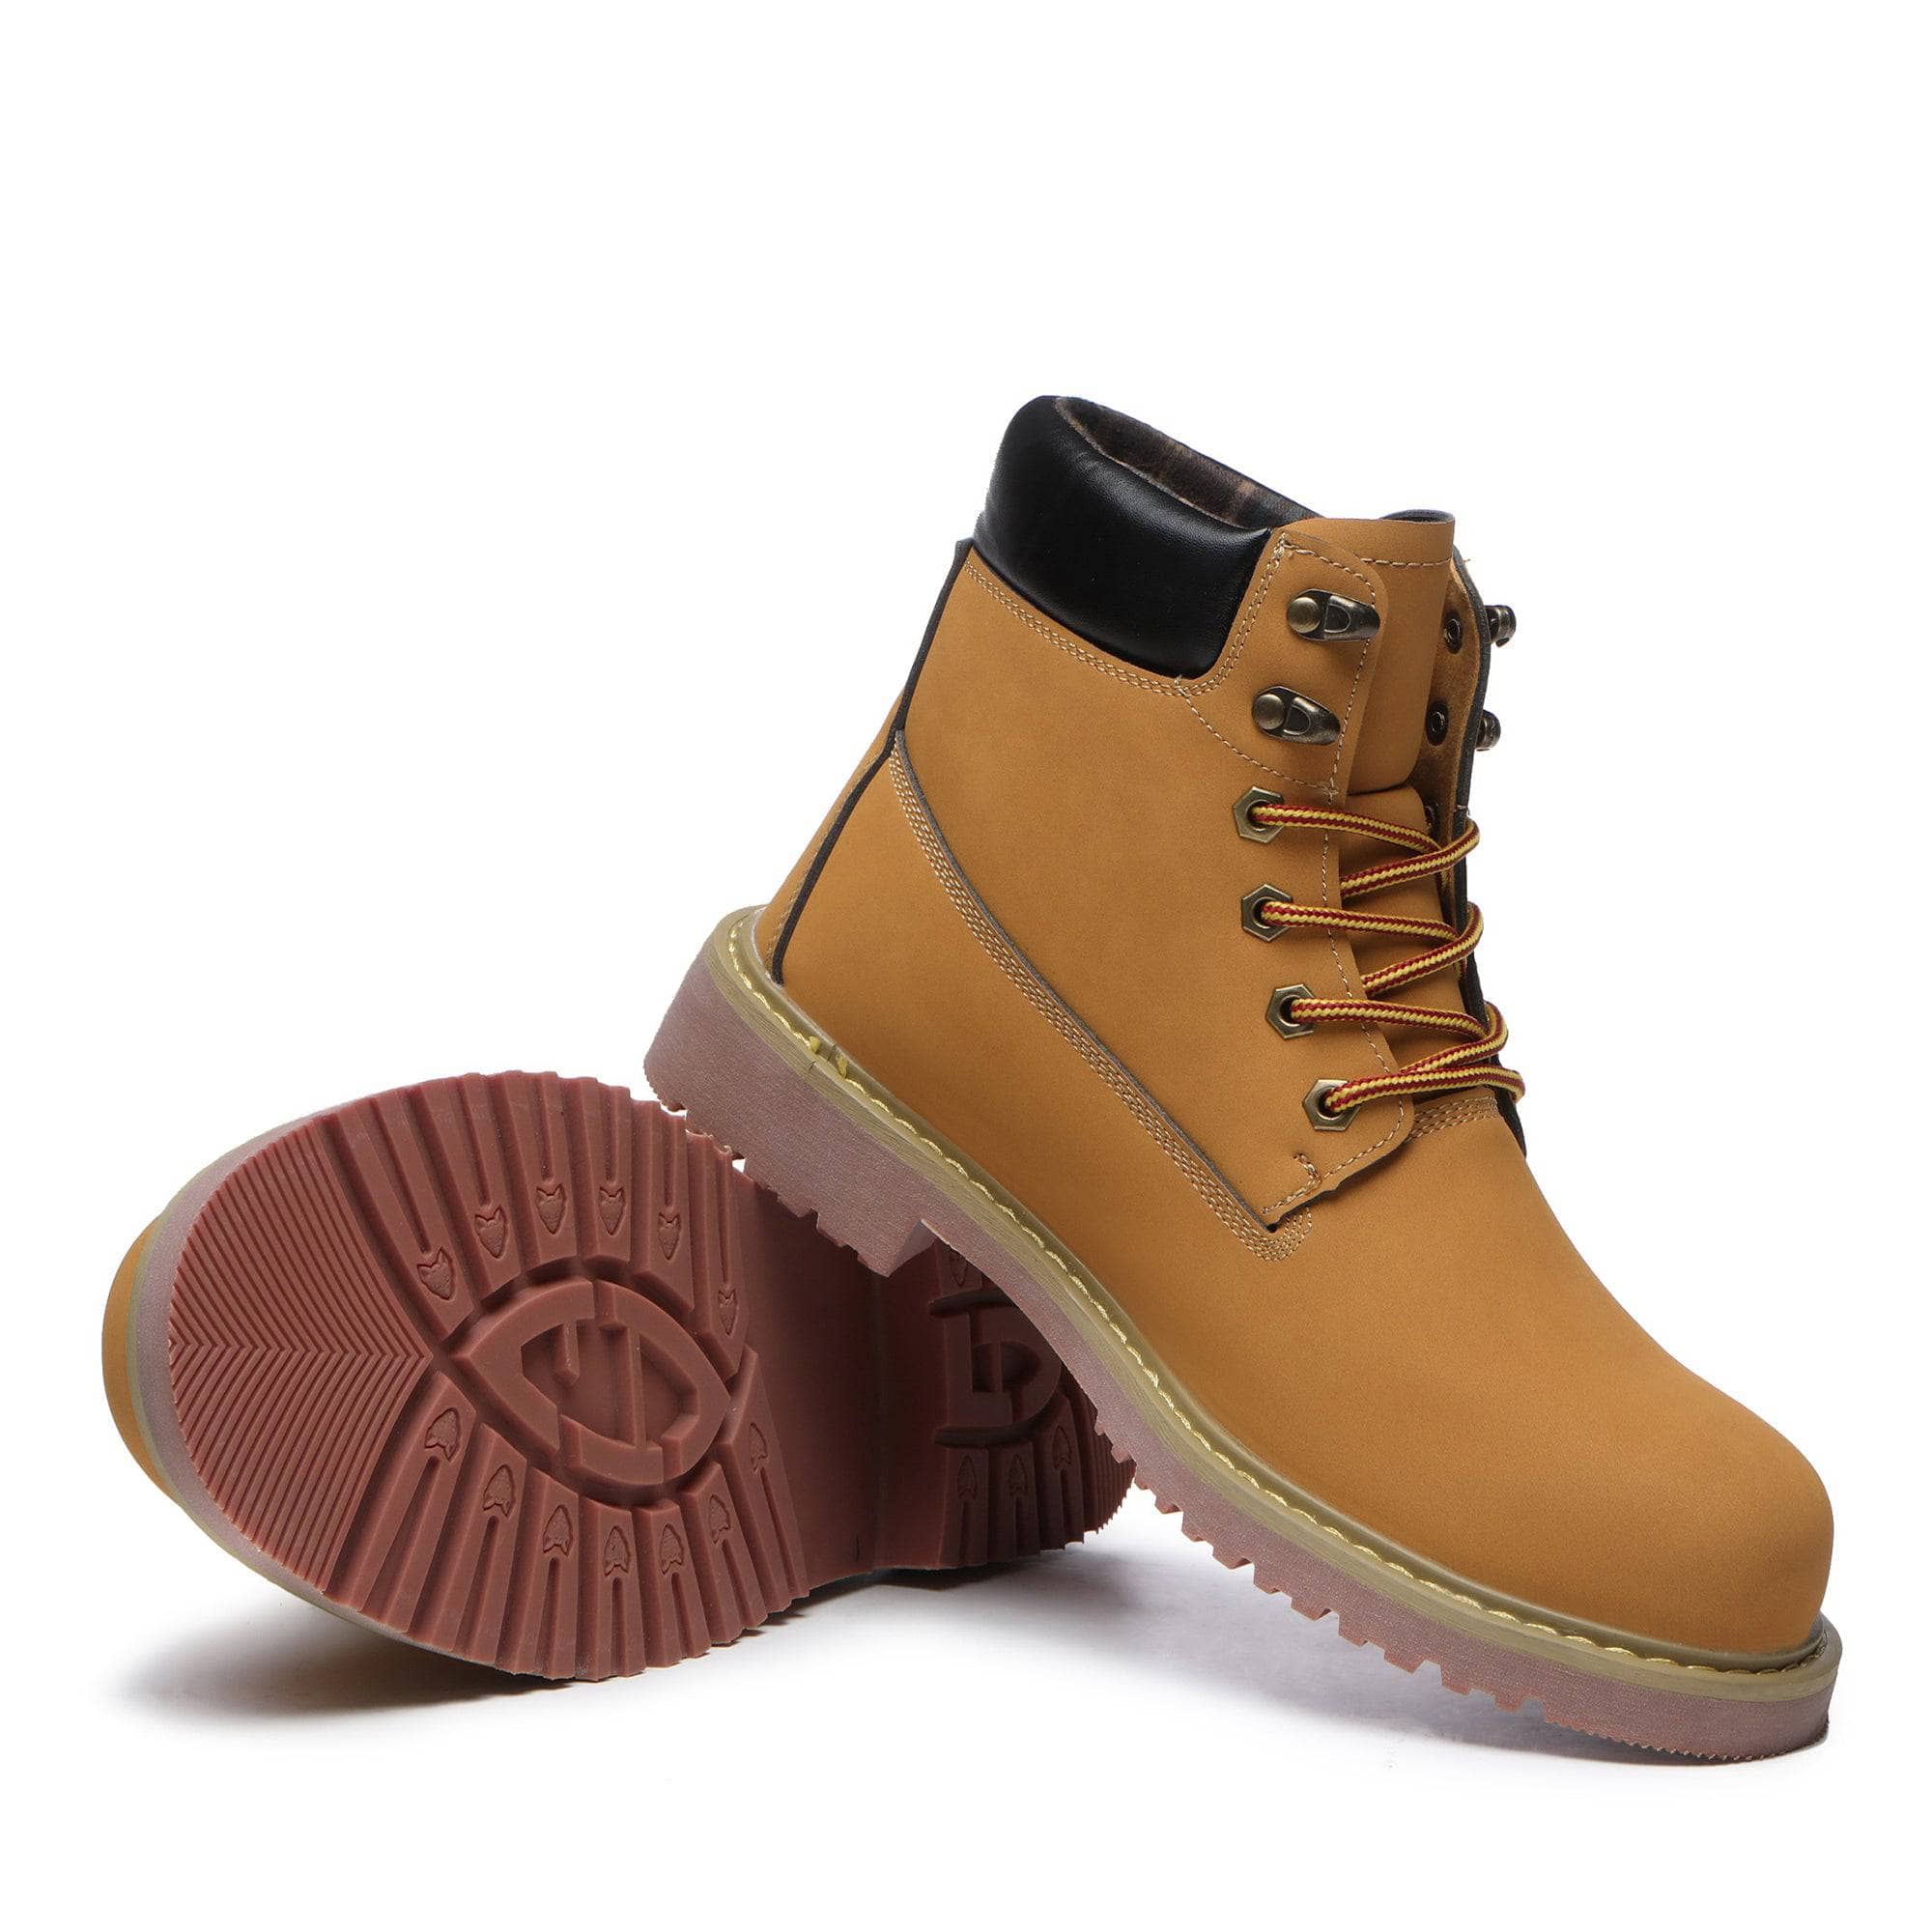 Outdoor Ugg Boots - Yaman Lace Up Boots - Original UGG Australia Classic